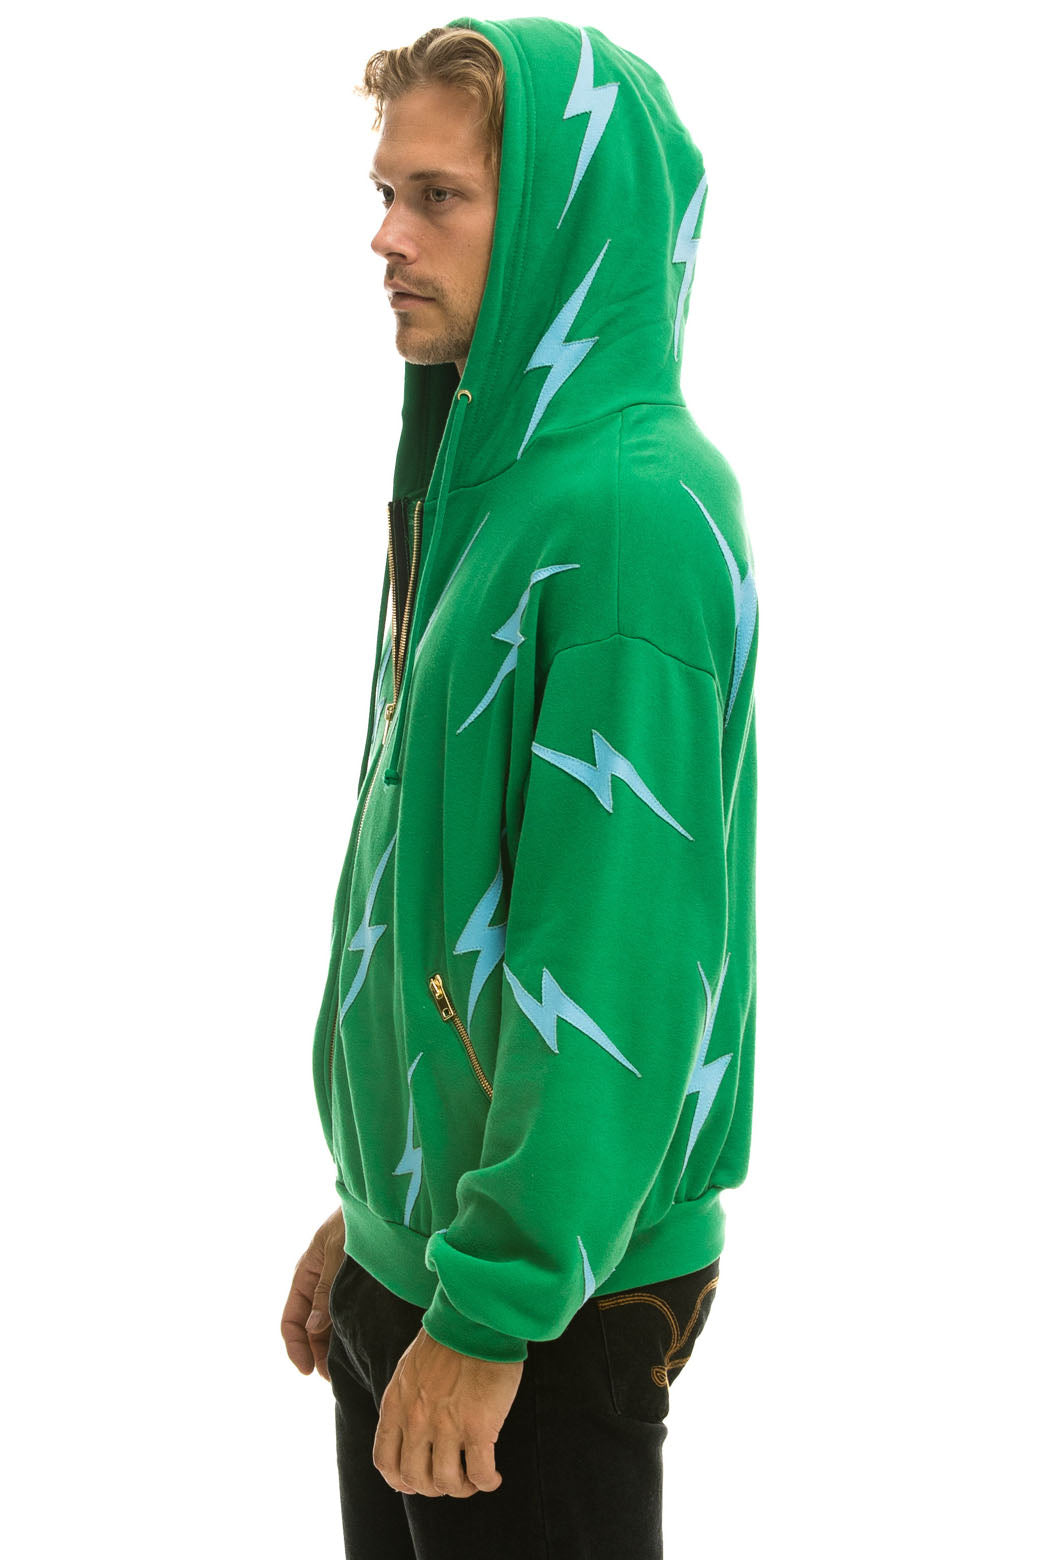 BOLT STITCH REPEAT RELAXED ZIP HOODIE WITH POCKET ZIPPERS - KELLY GREEN // BLUE Hoodie Aviator Nation 